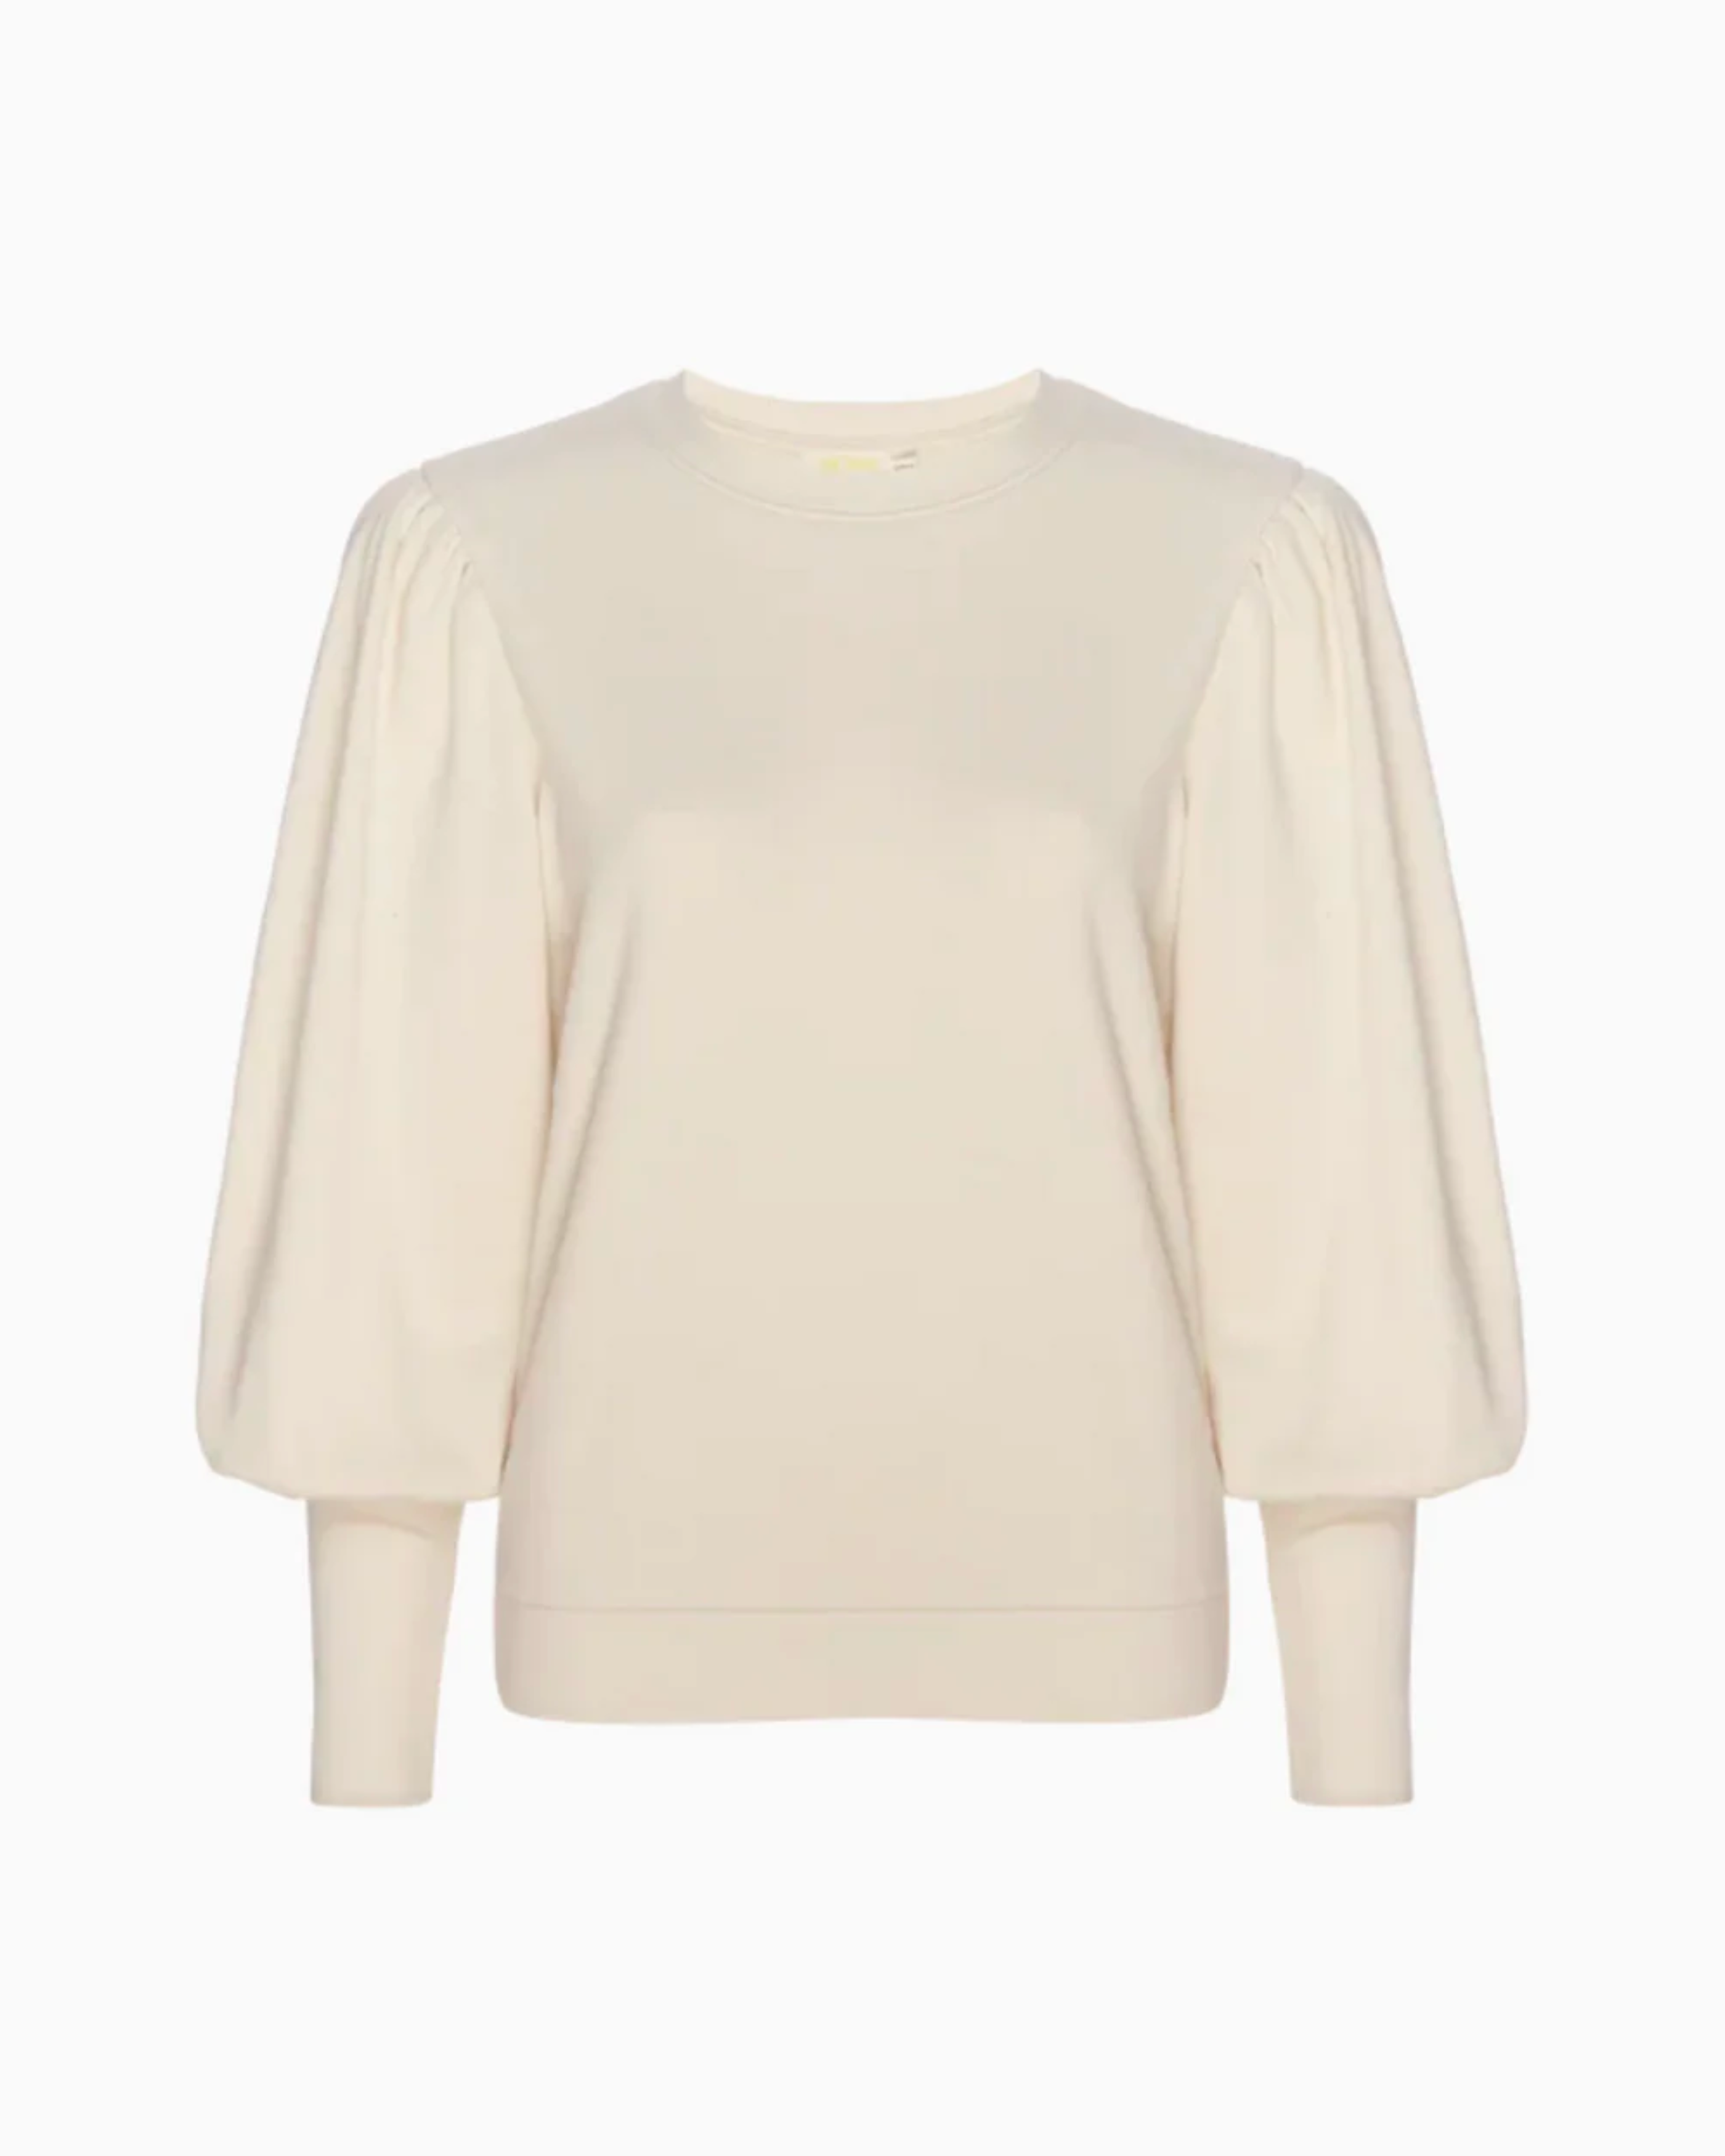 Nation Taylor Exaggerated Cuff Top in Parchment